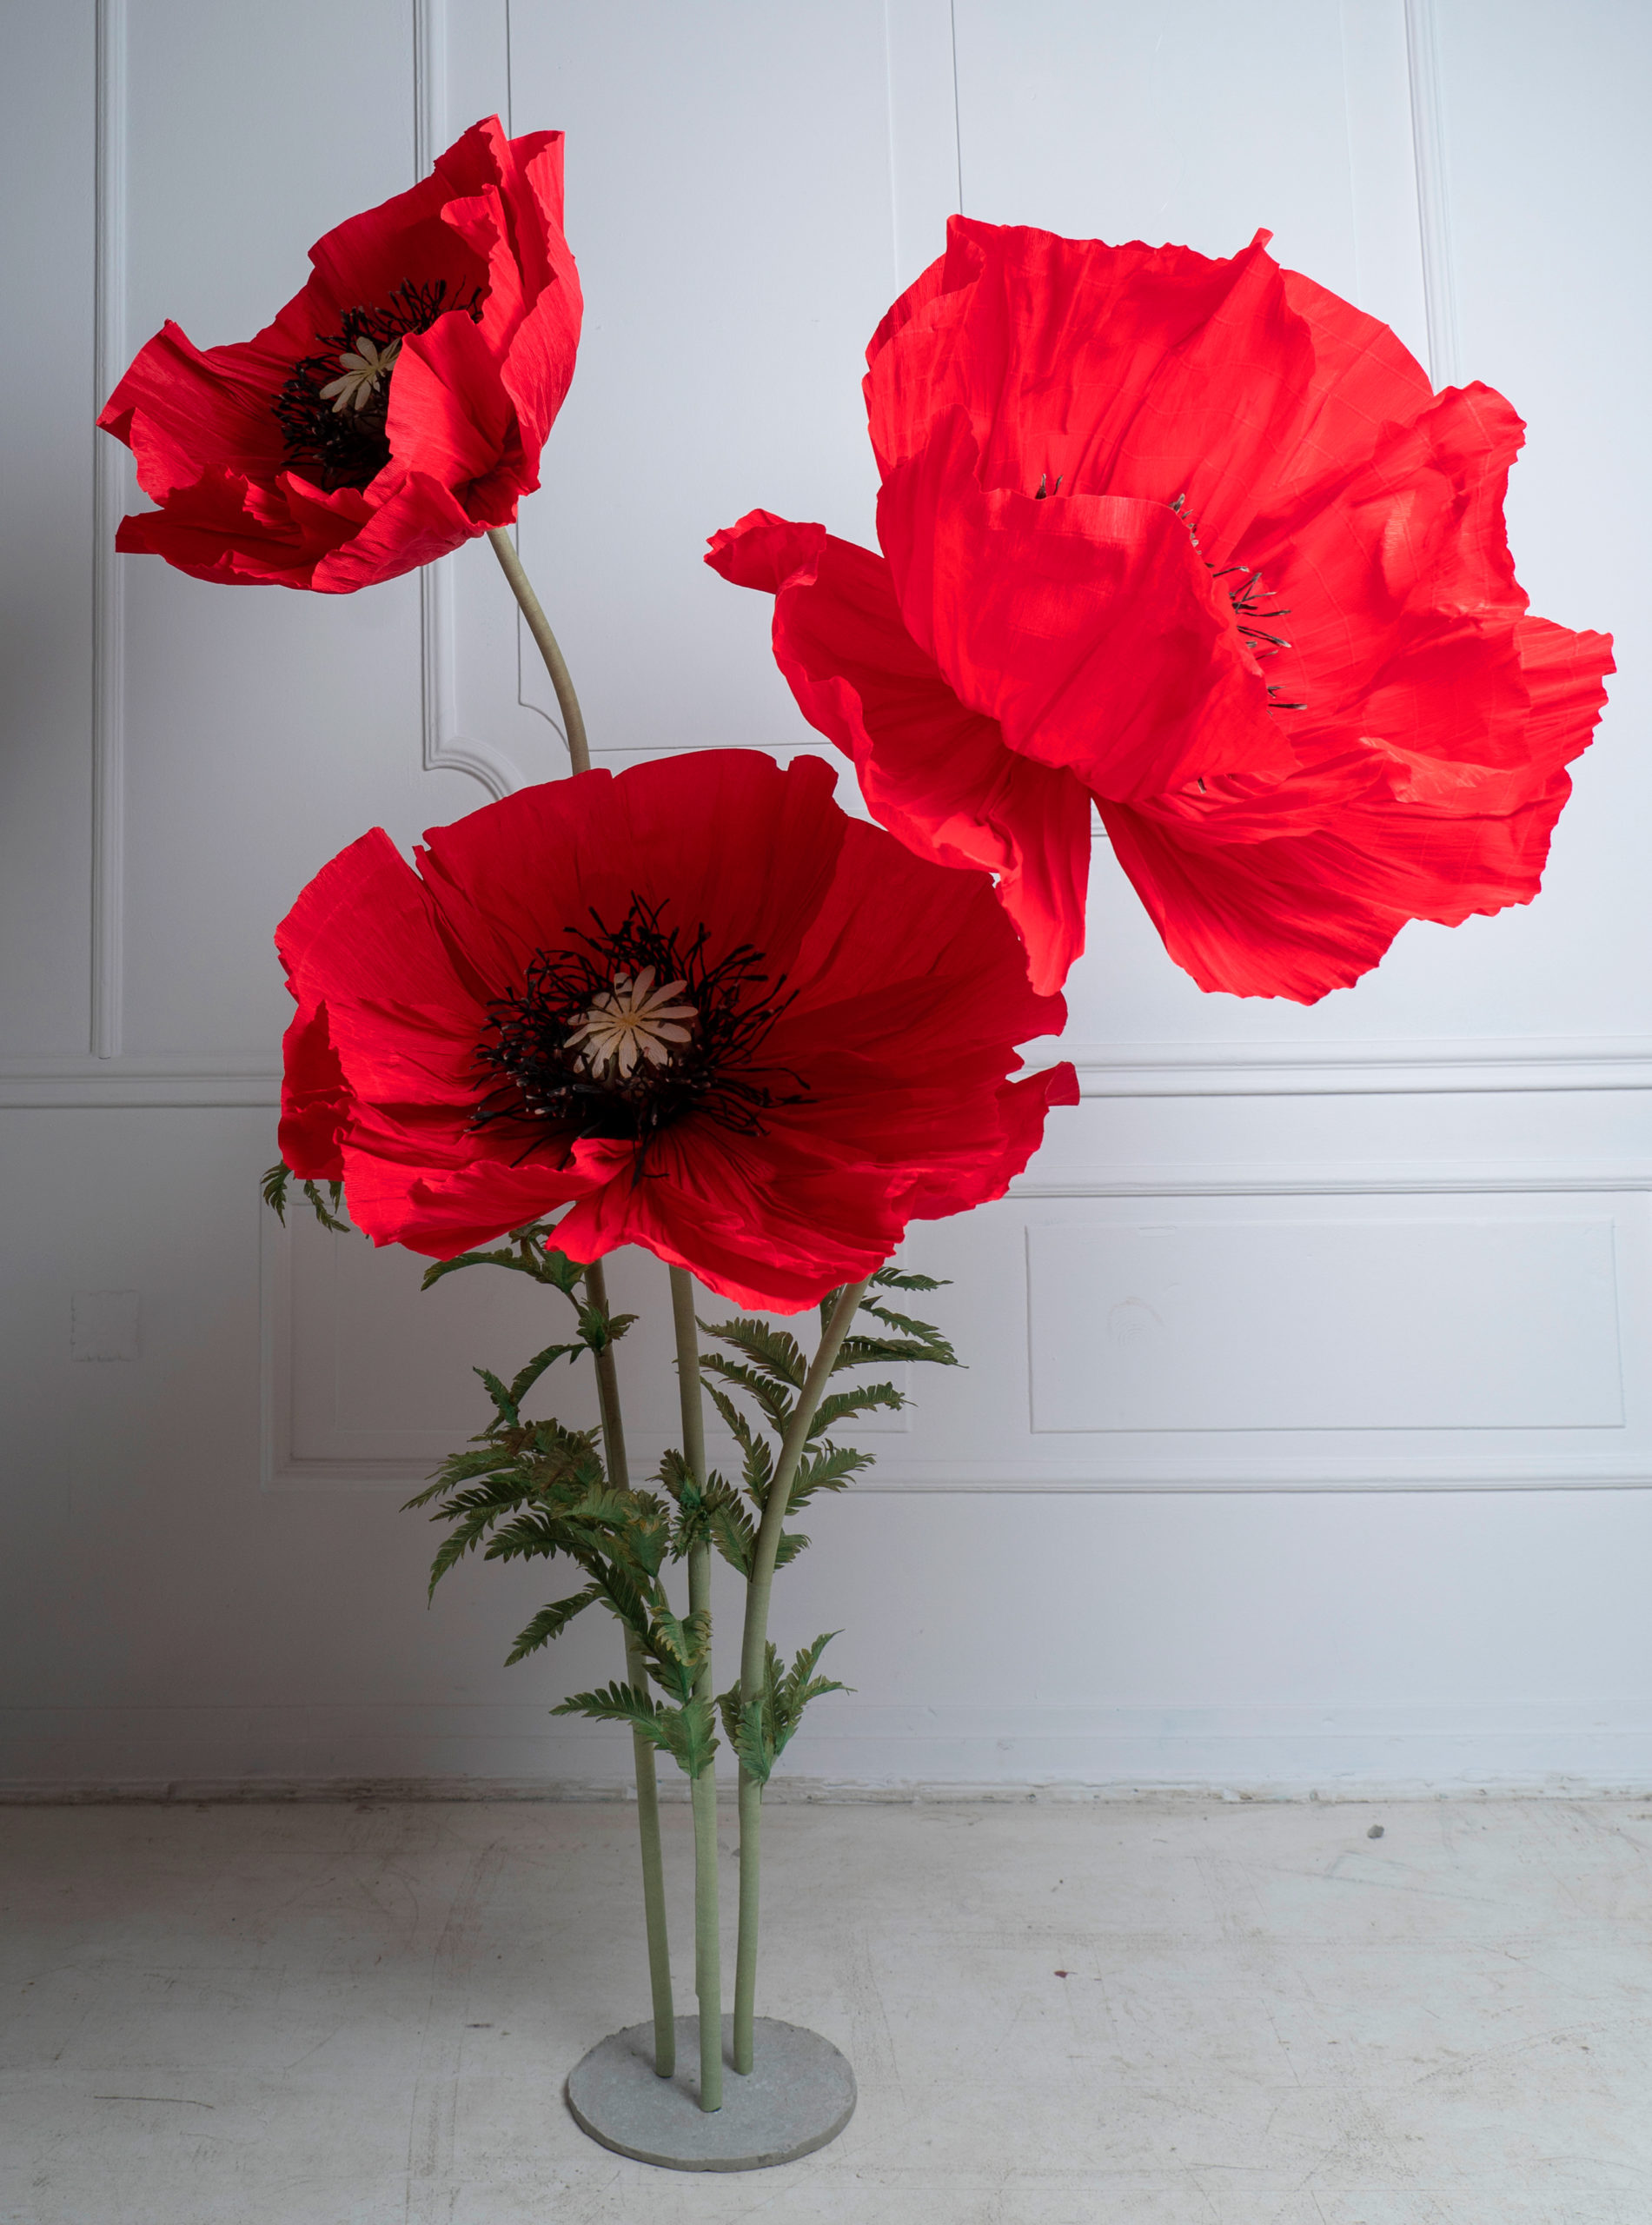 Giant red poppies